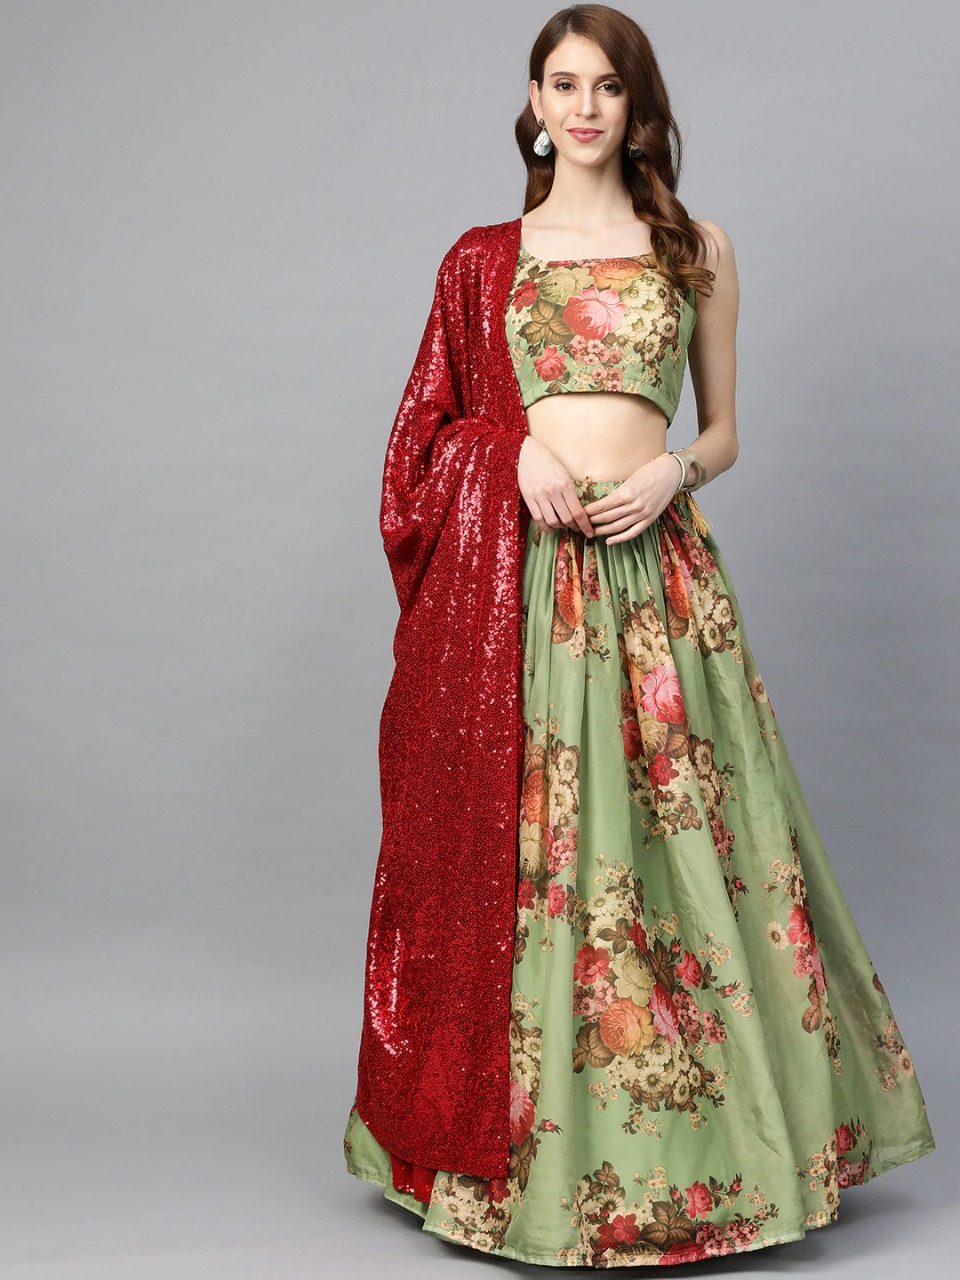 Floral Latest Green Lehenga Choli With Red Exclusive Dupatta Collection